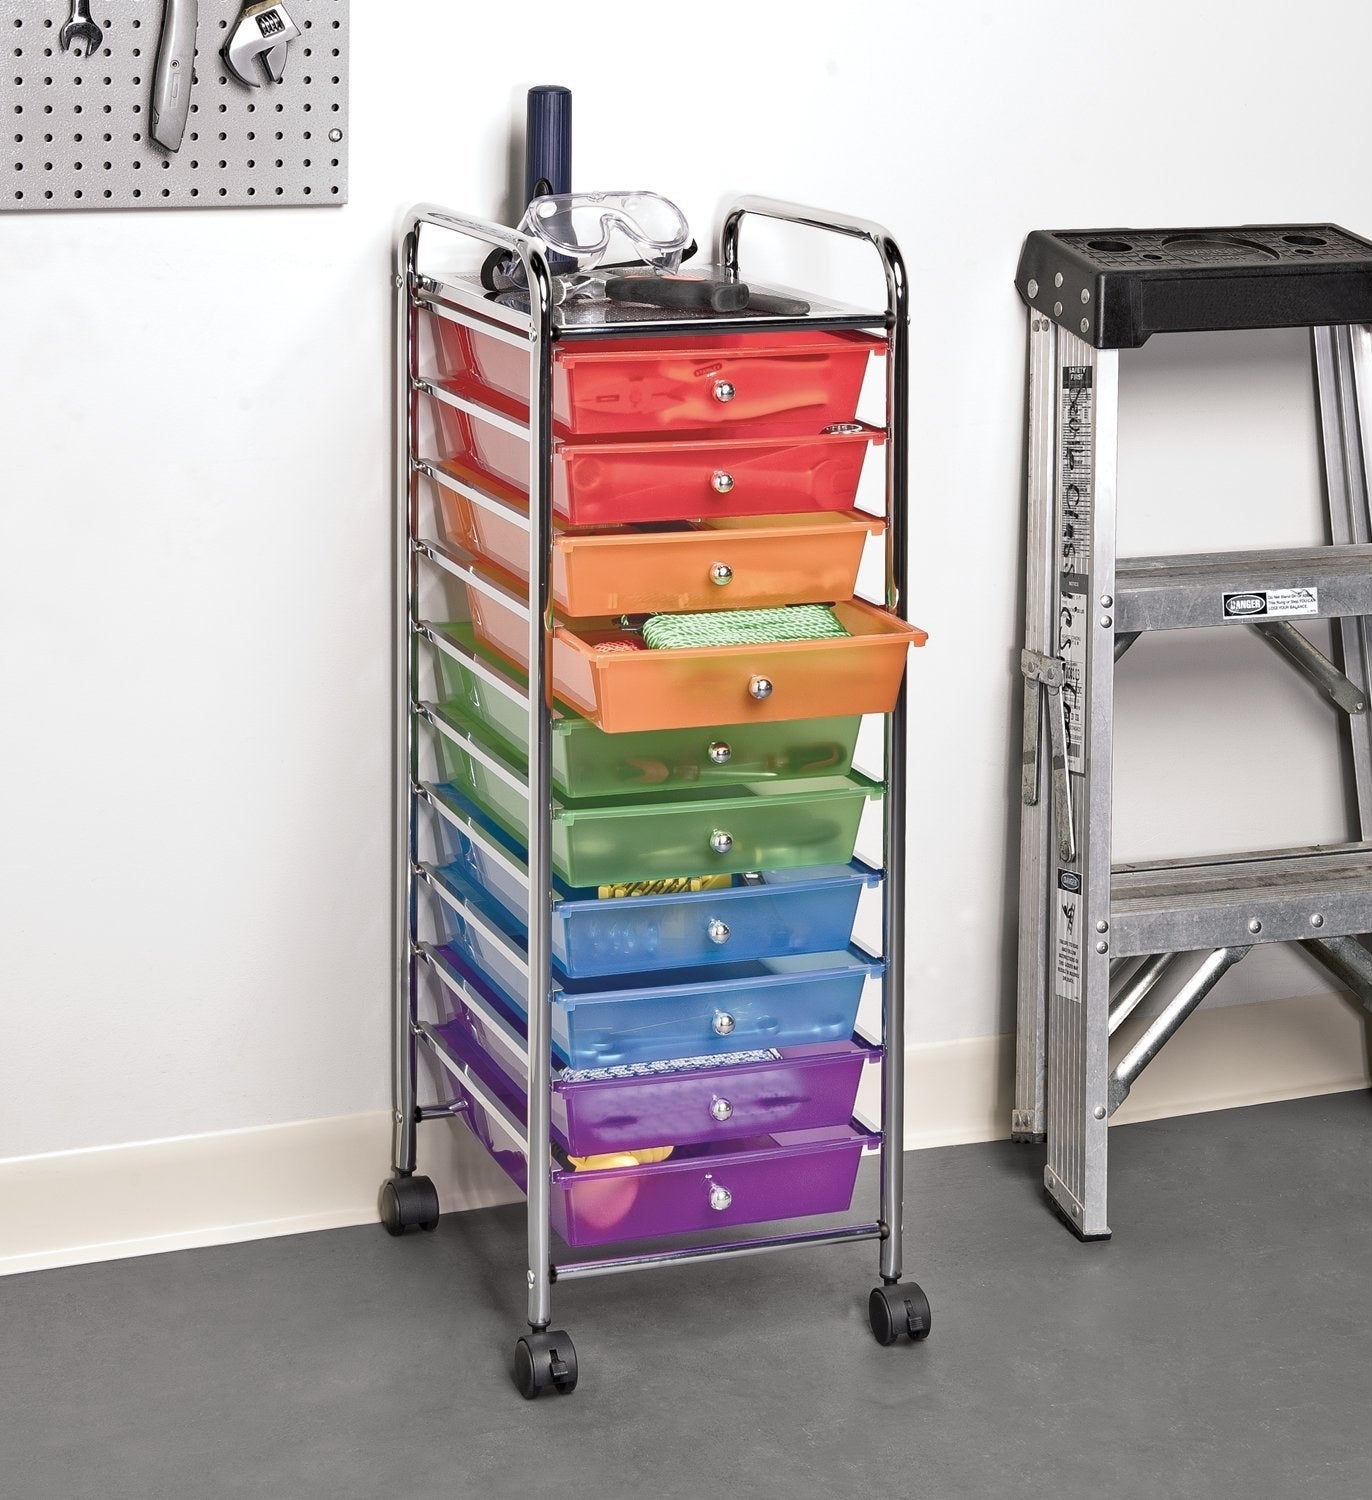 a ten drawer wheely shelf with two drawers in each color of the rainbow except yellow